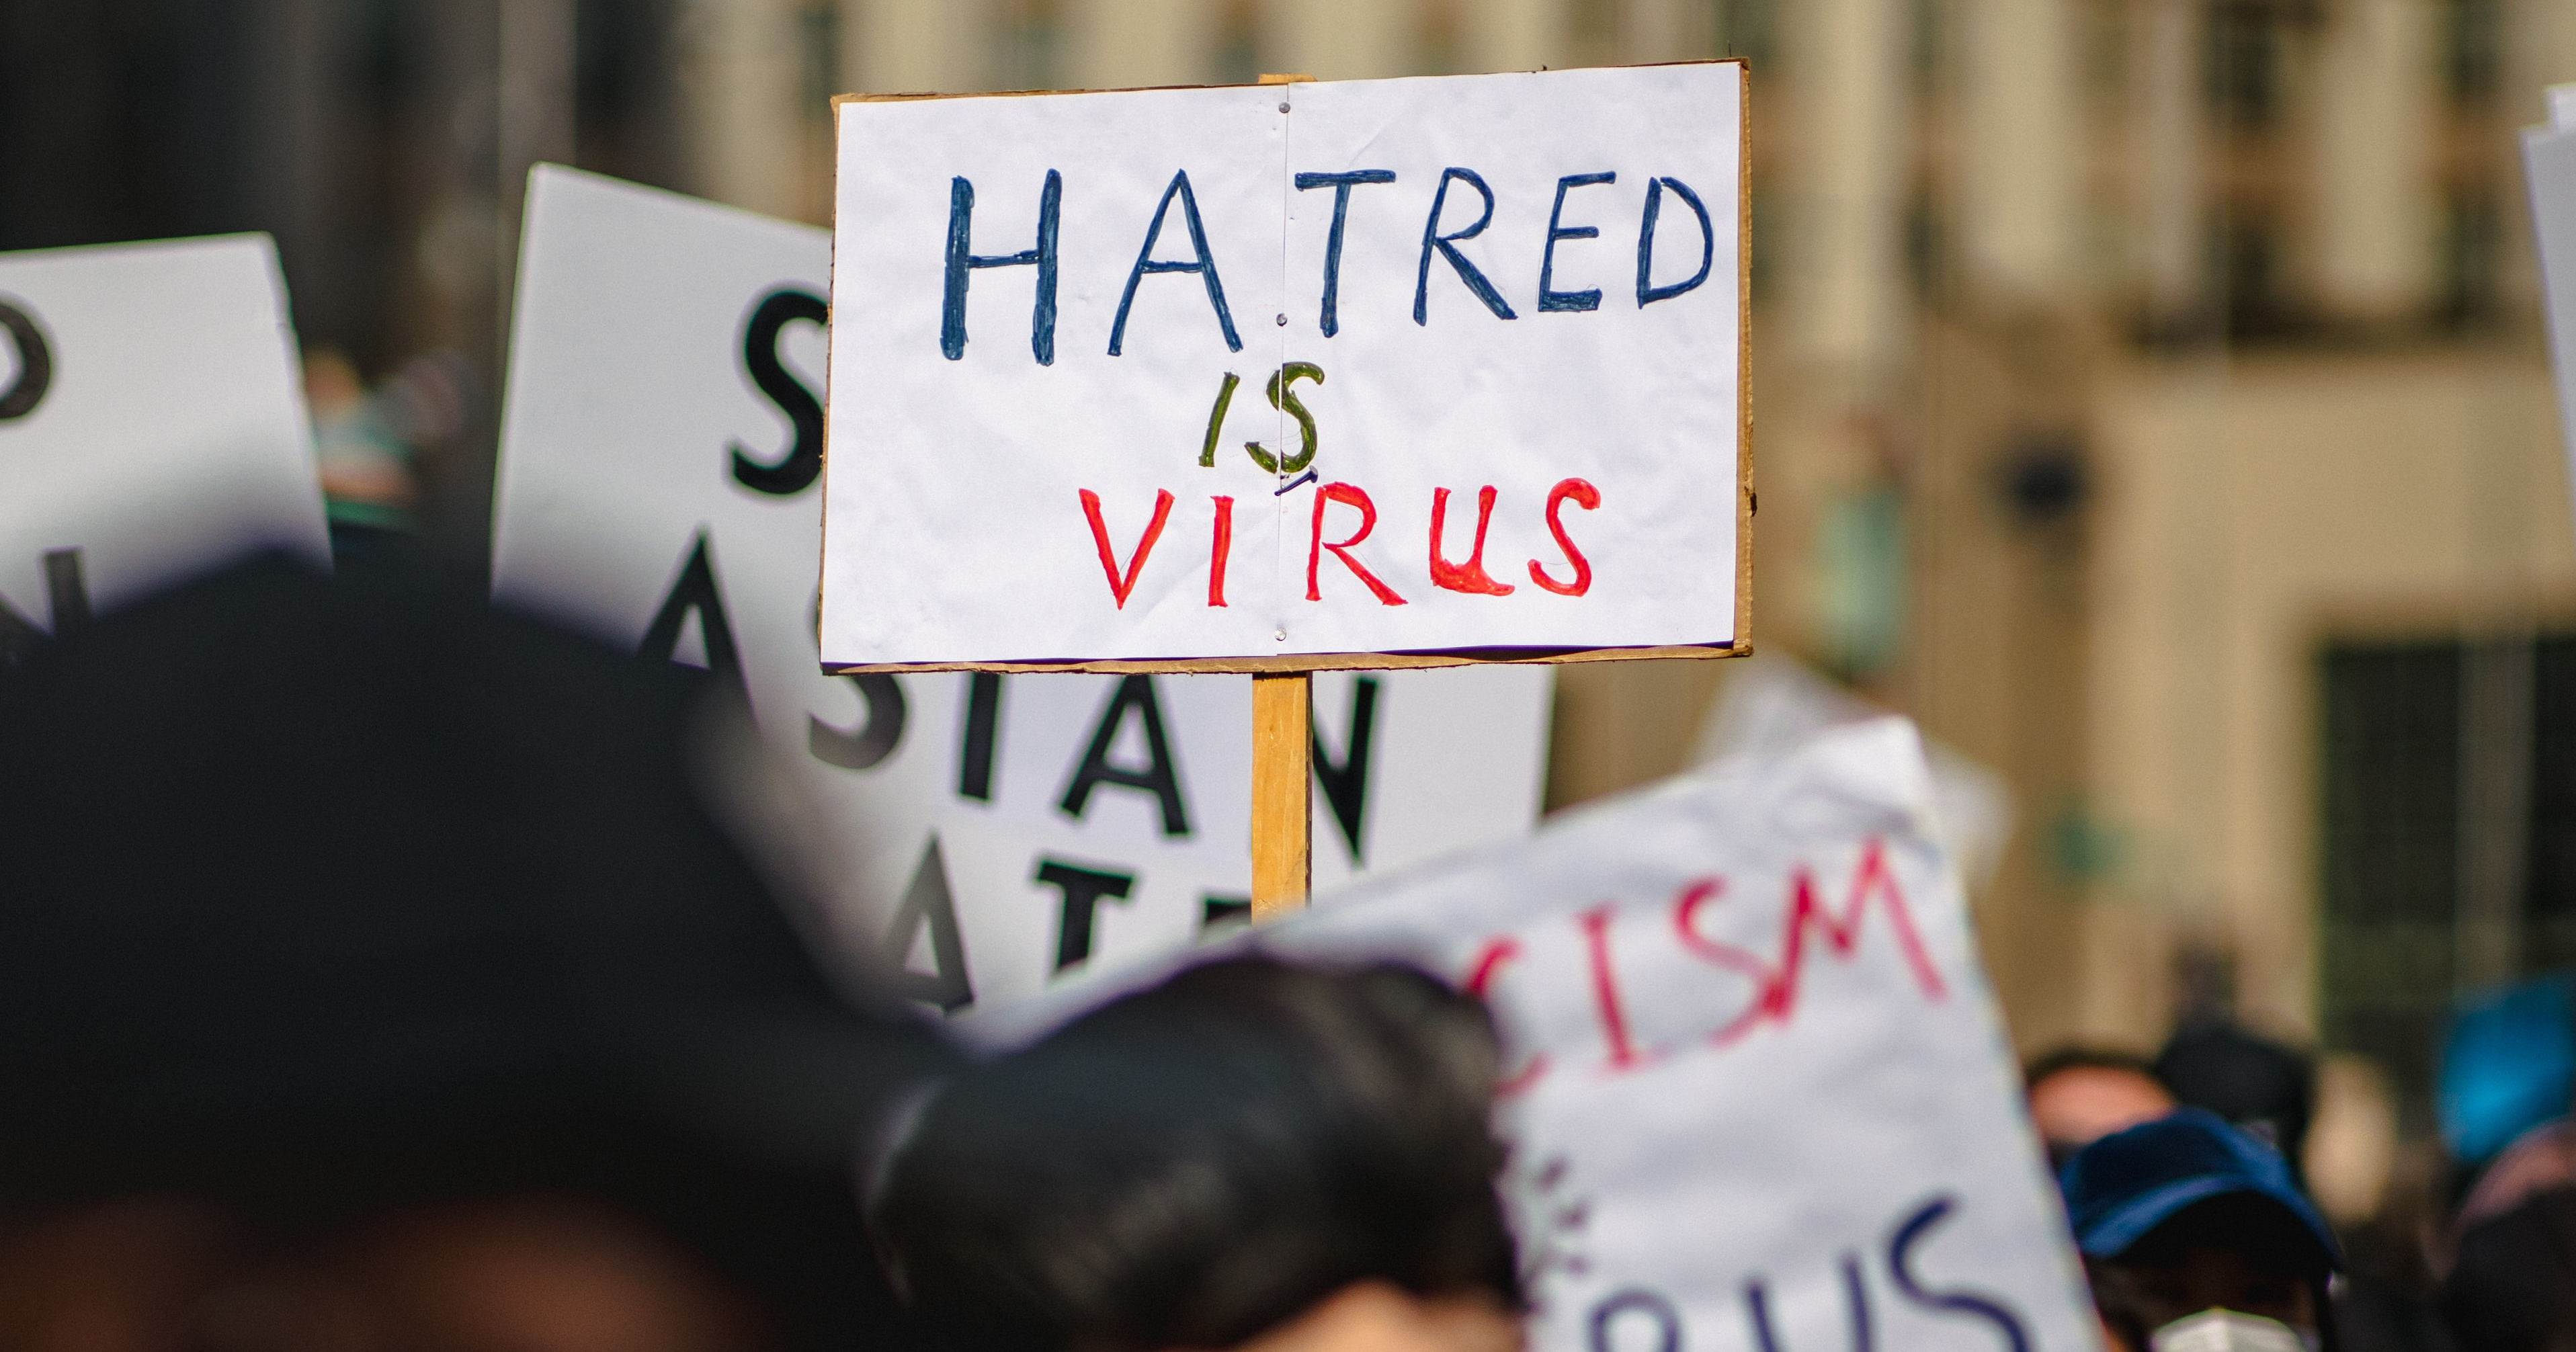 A sign that reads, "HATRED IS VIRUS" as the European Commission work to criminalise hate speech in the EU.